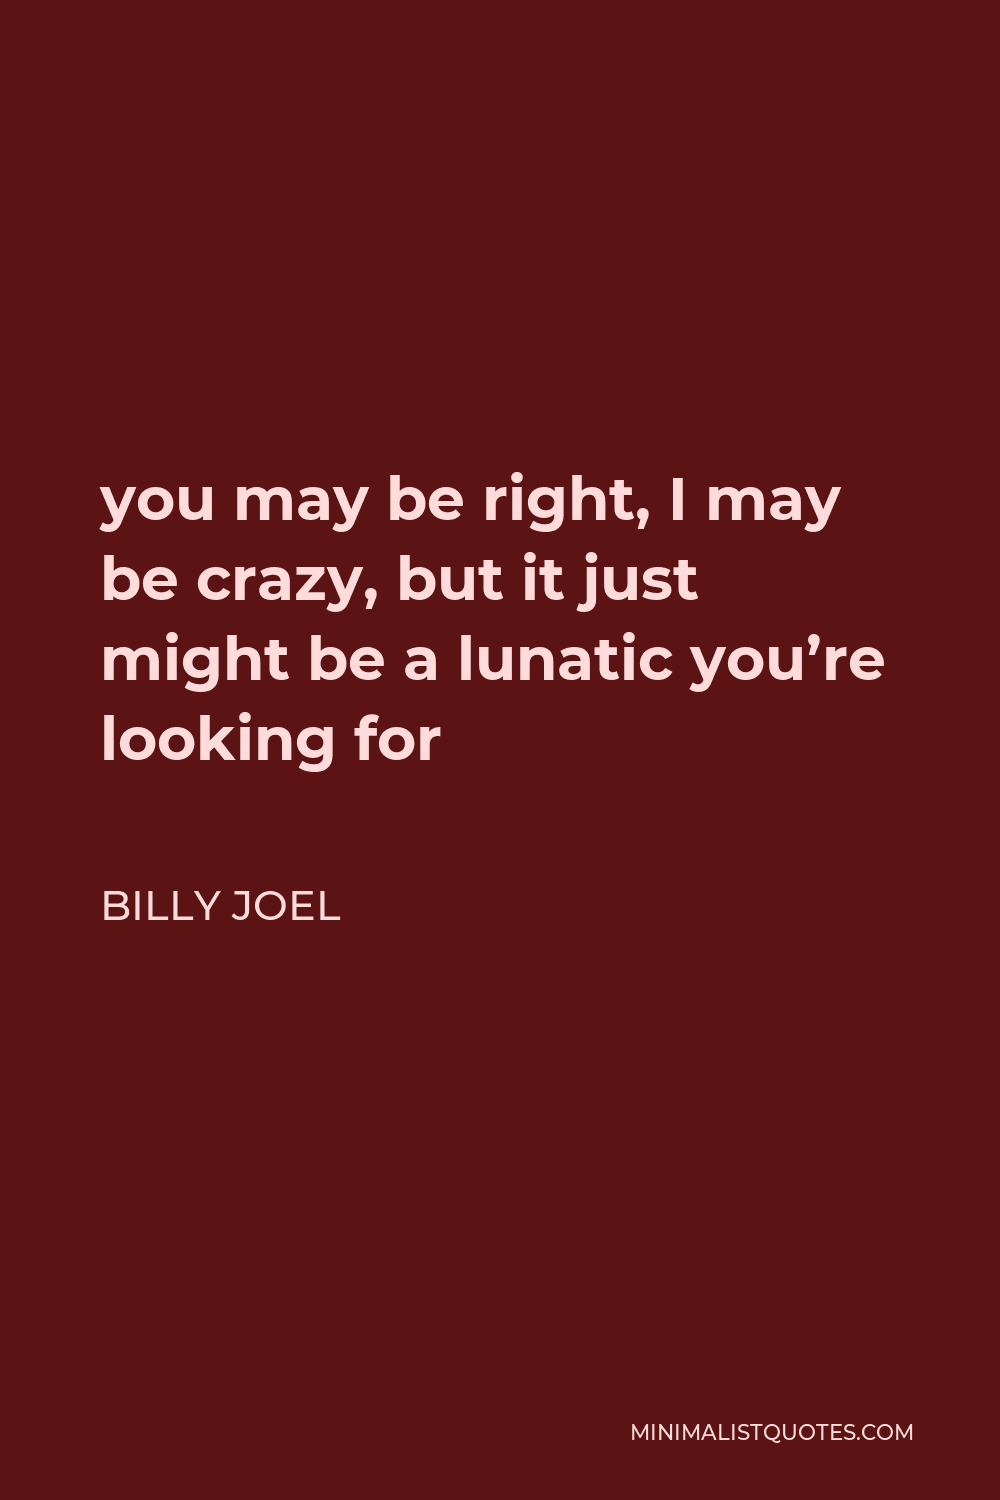 Billy Joel Quote - you may be right, I may be crazy, but it just might be a lunatic you’re looking for